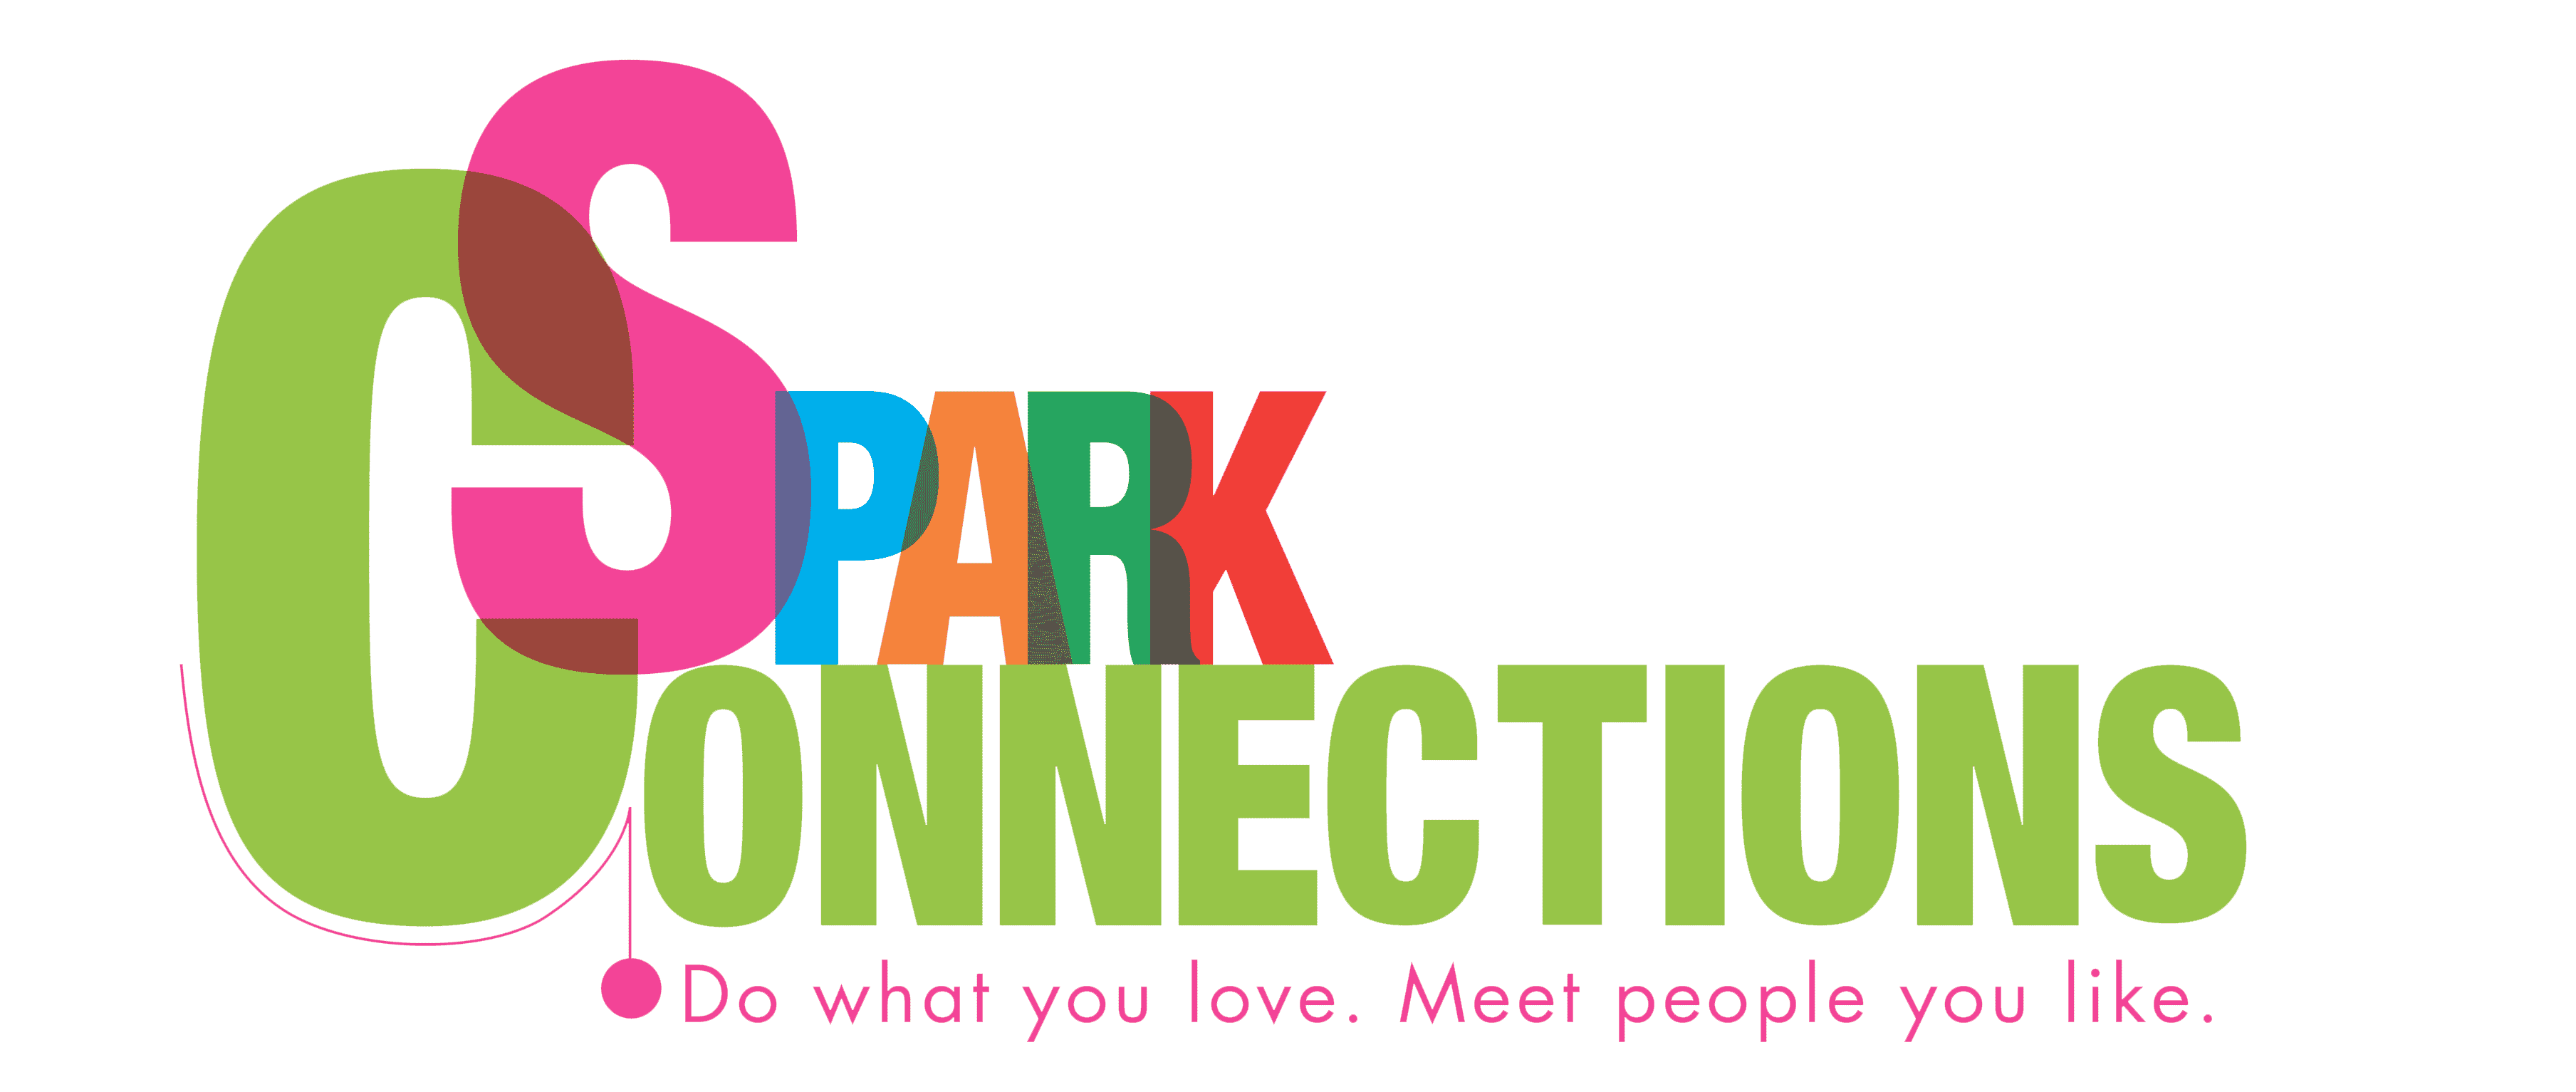 spark connections logo